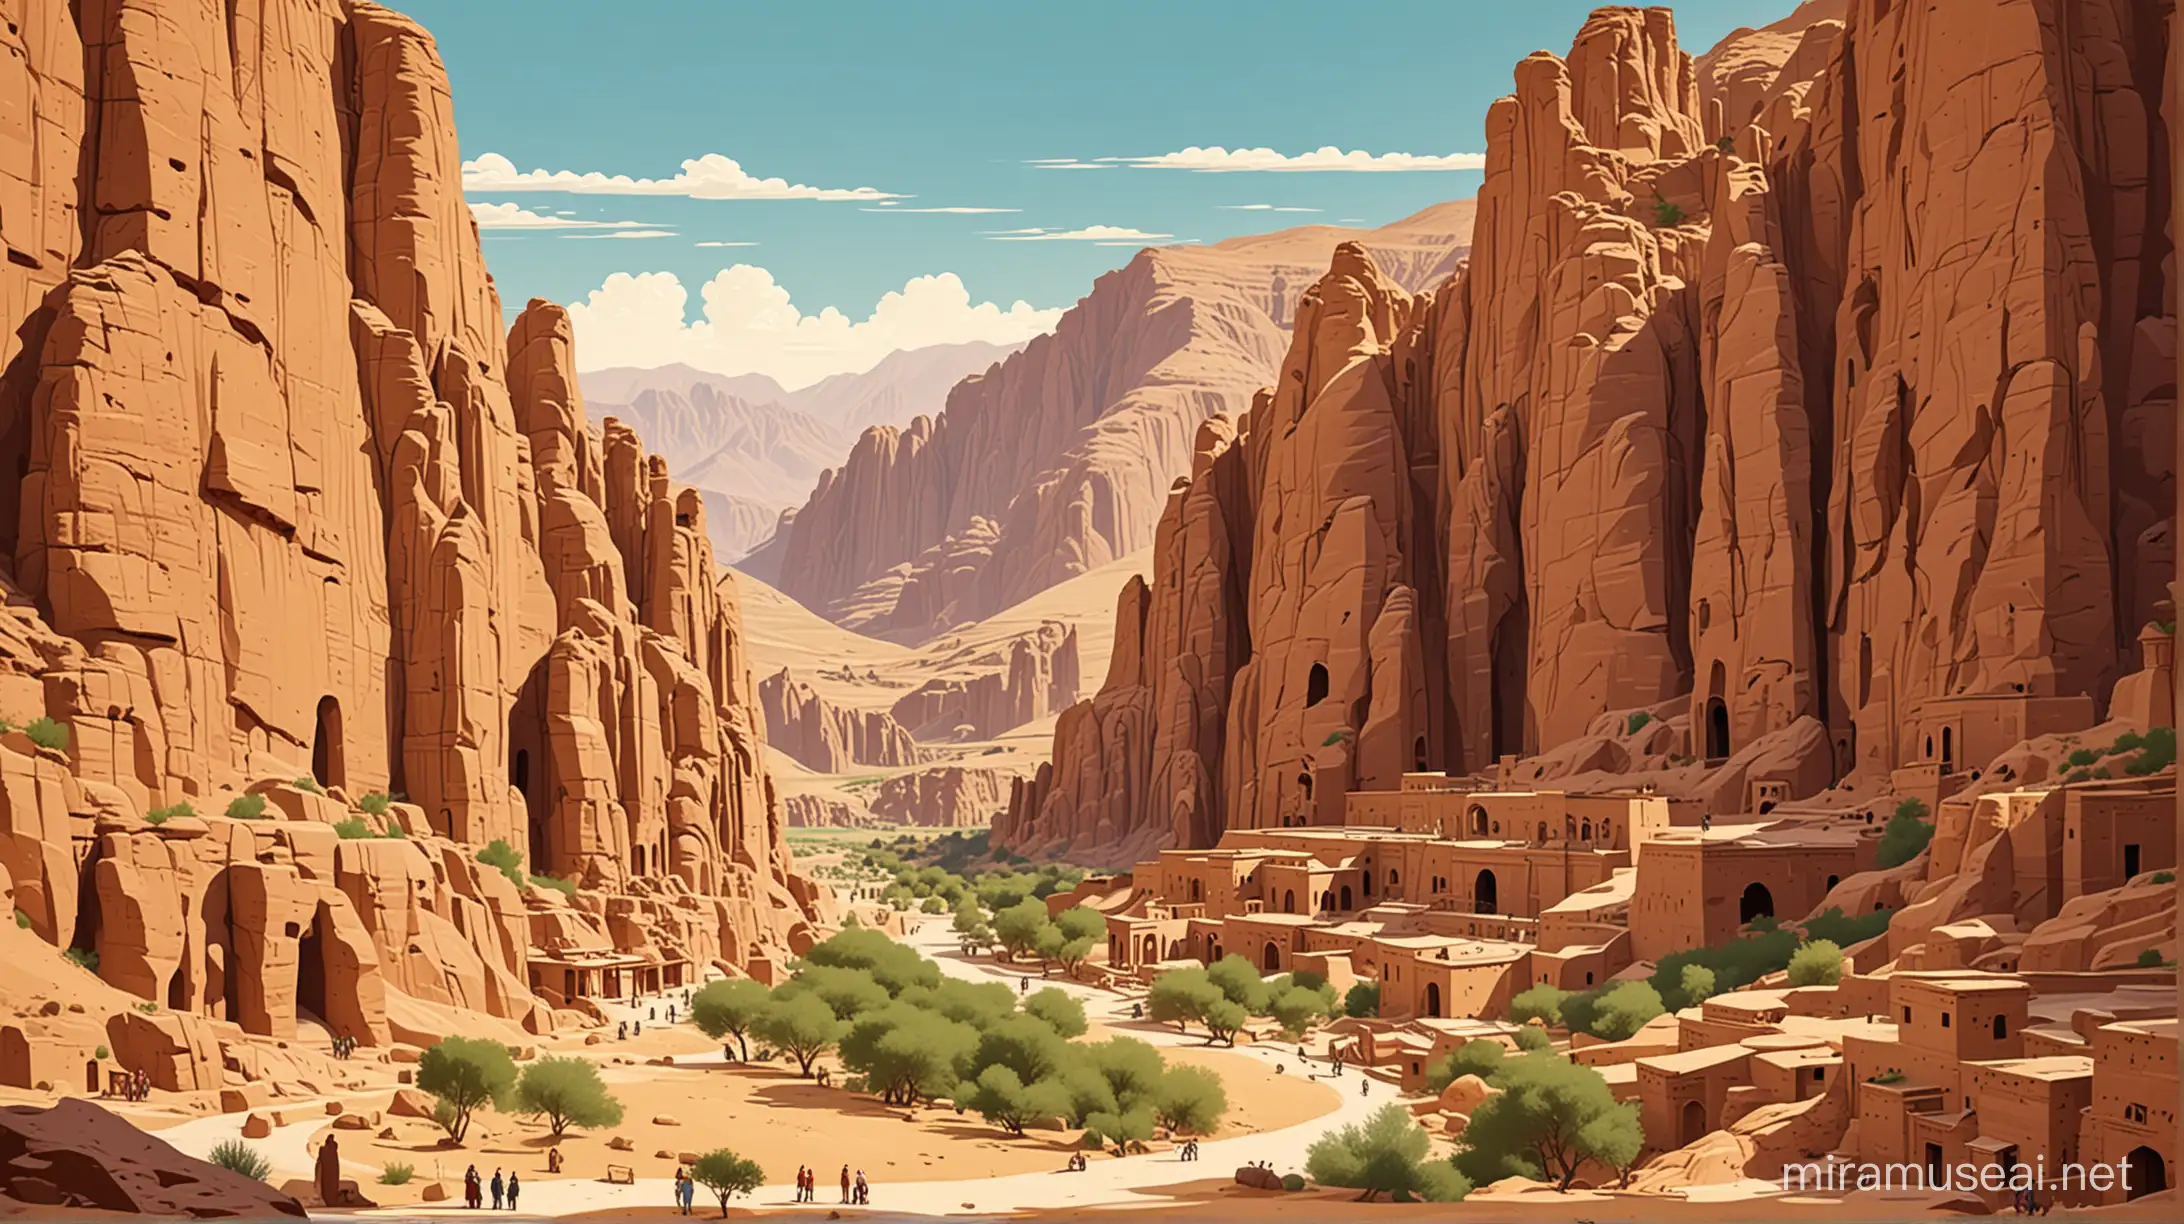 Mixed style of flat vector art and travel poster: recreation of ancient city of Bamiyan with one standing golden Buddha statue (standing posture) graved in cliffs and an ancient middle Eastern market.